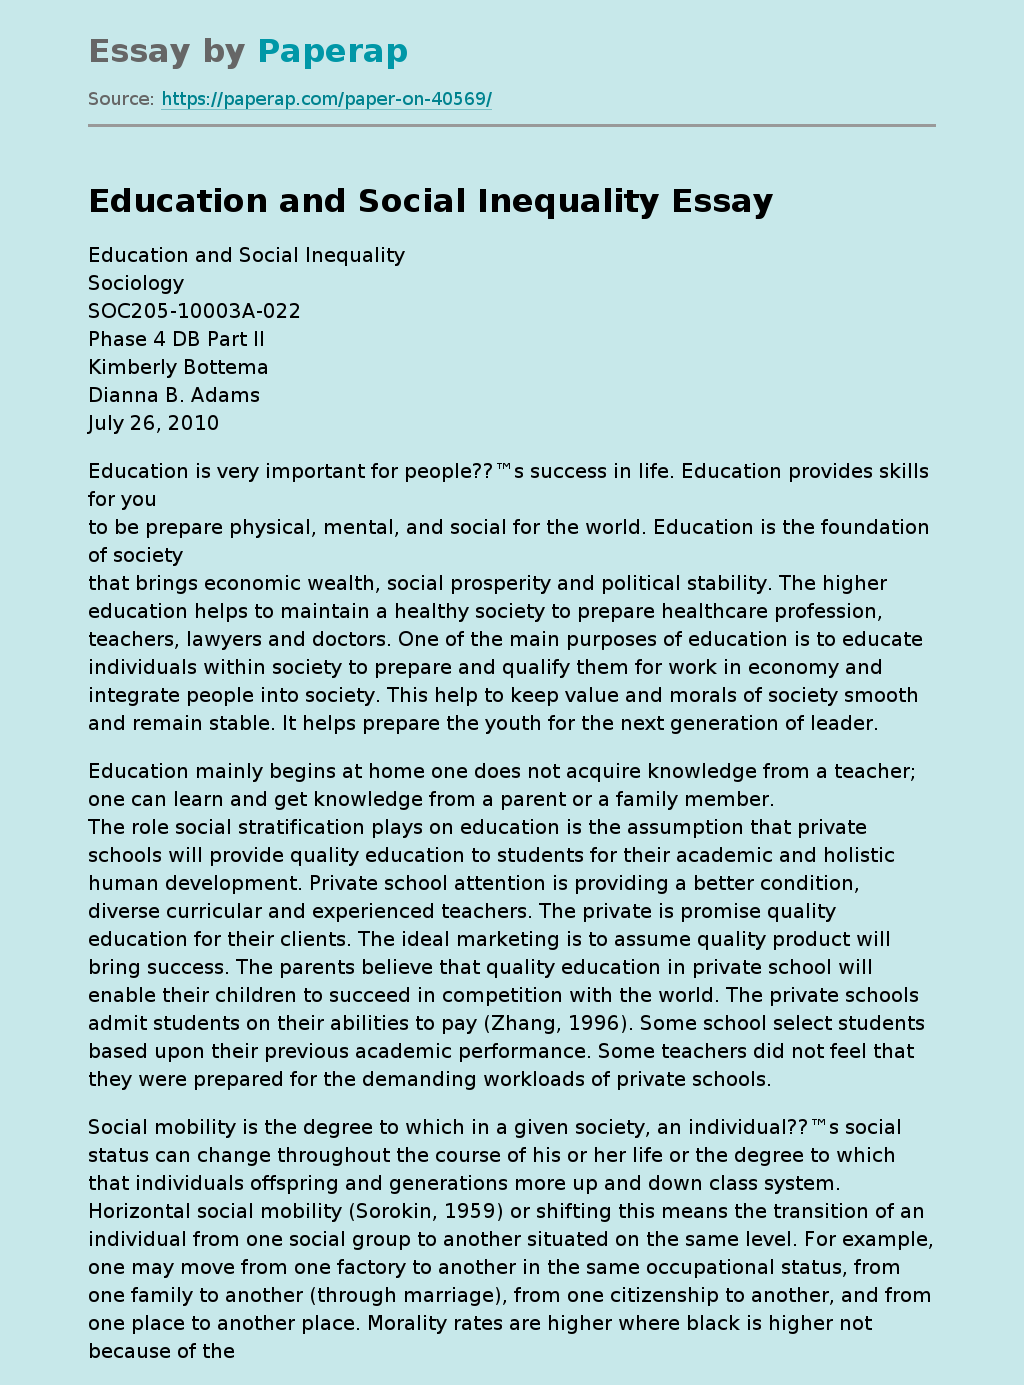 Education and Social Inequality